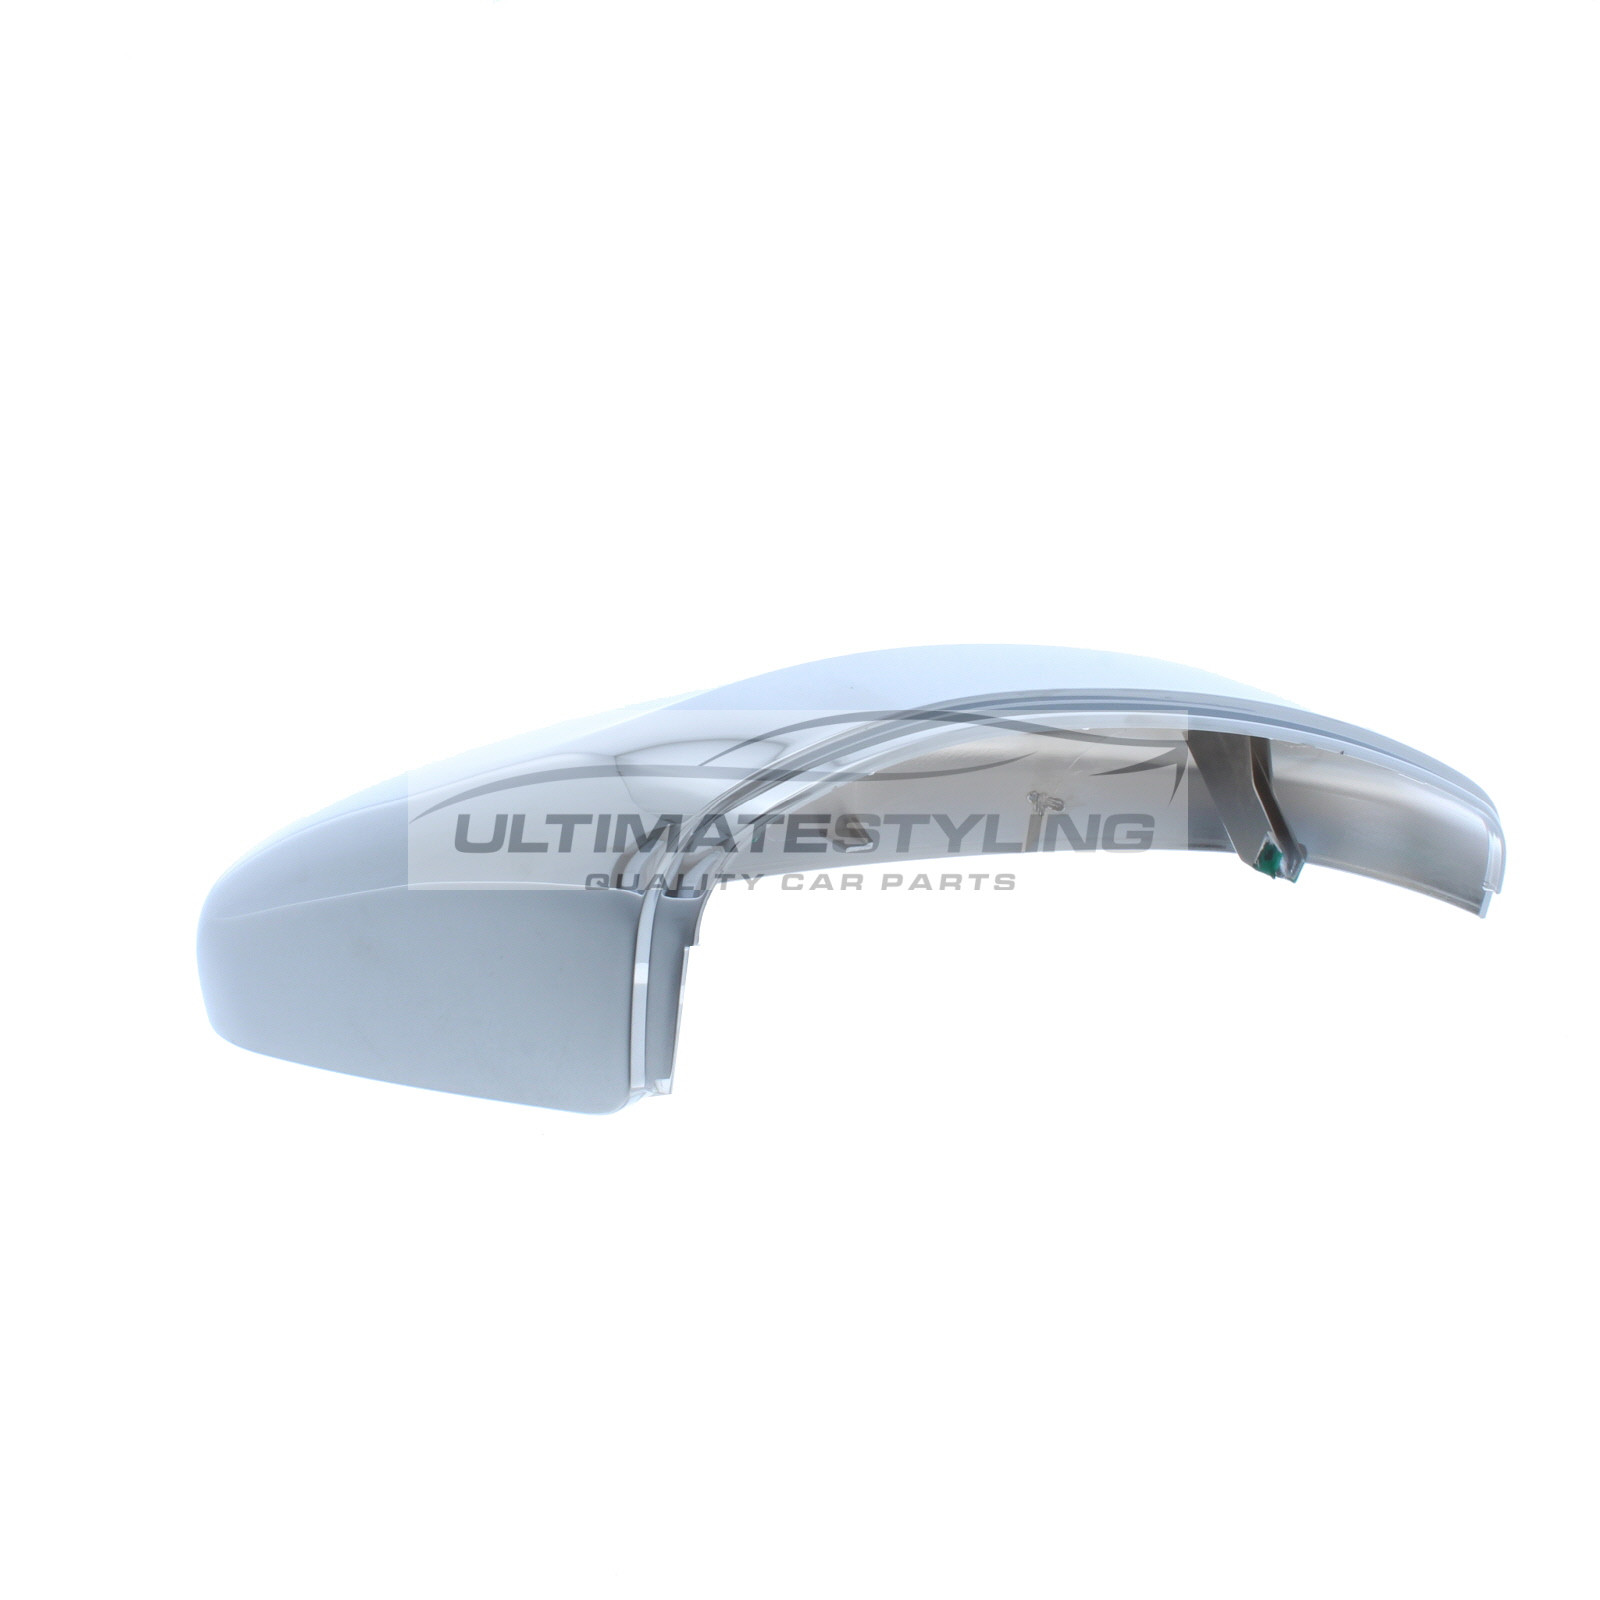 Peugeot 208 / 2008 Wing Mirror Cover - Drivers Side (RH) - Chrome Finish